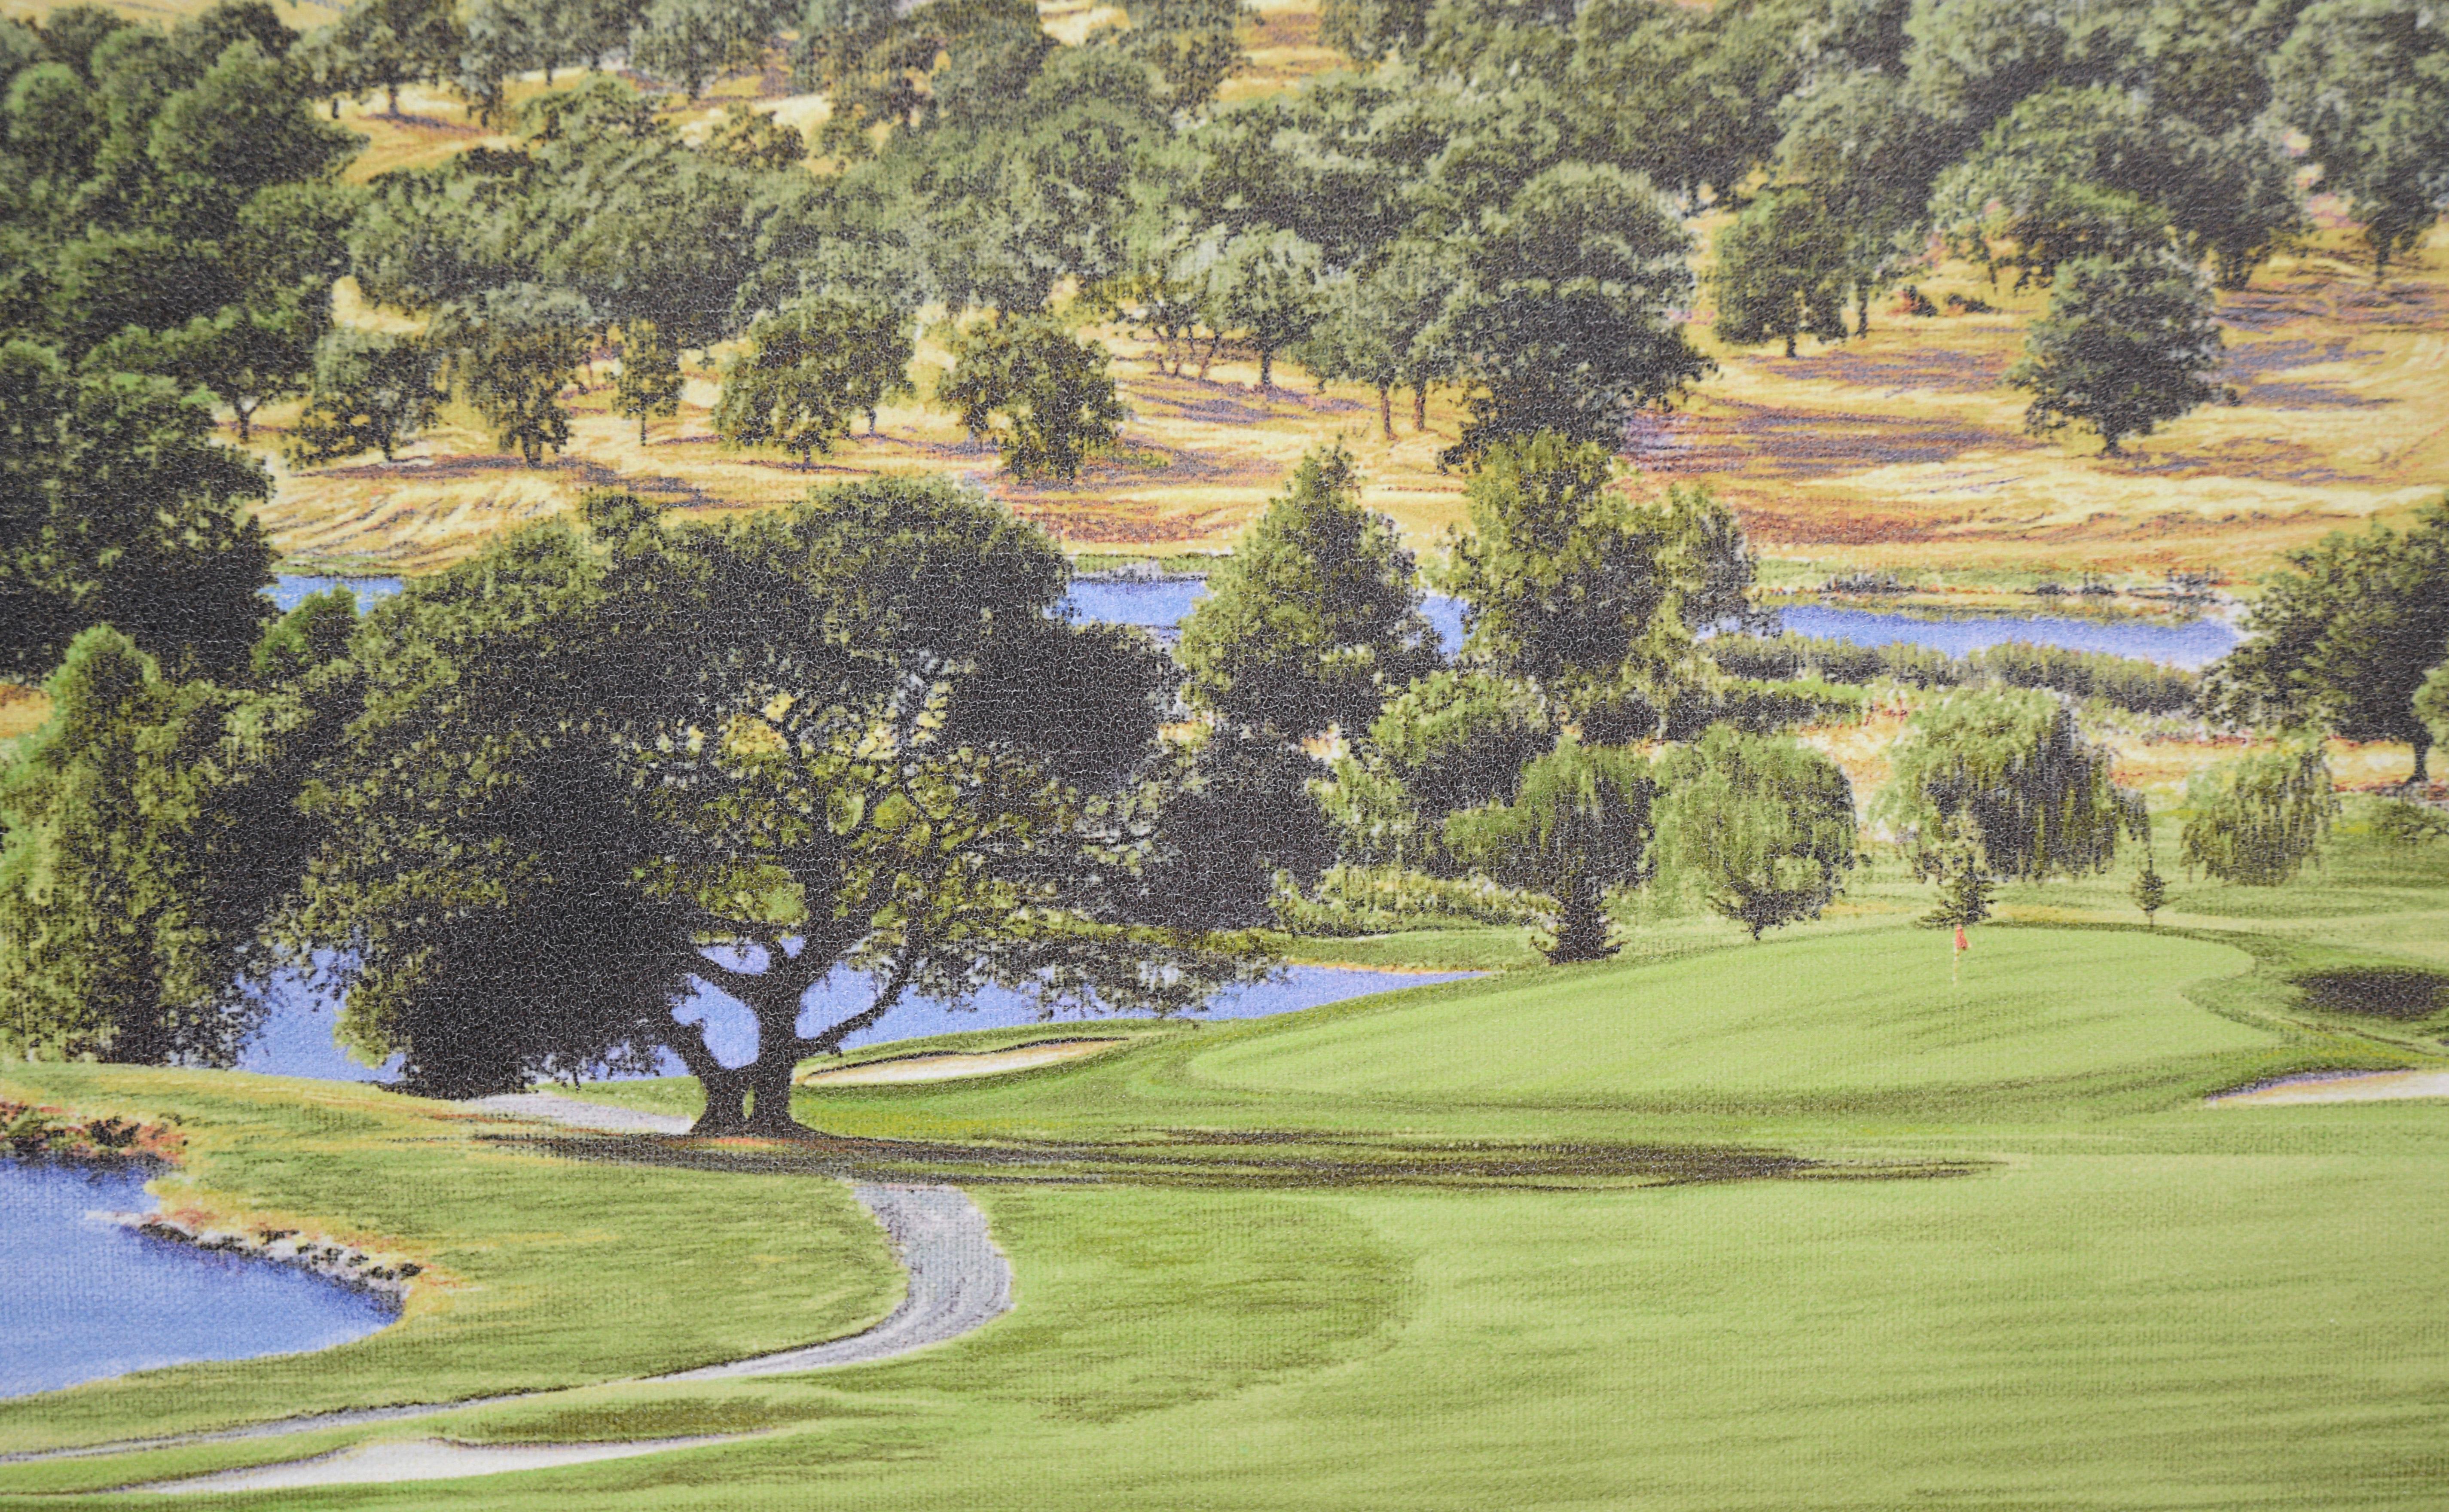 The Tenth Hole at Auburn Valley Golf Course - AP, 1/50 - Giclee on Canvas

Serene depiction of Auburn Valley Golf Course and the surrounding hills by Jim Fitzpatrick (American, b. 1947). The viewer is standing facing the flag at the 10th hole, with